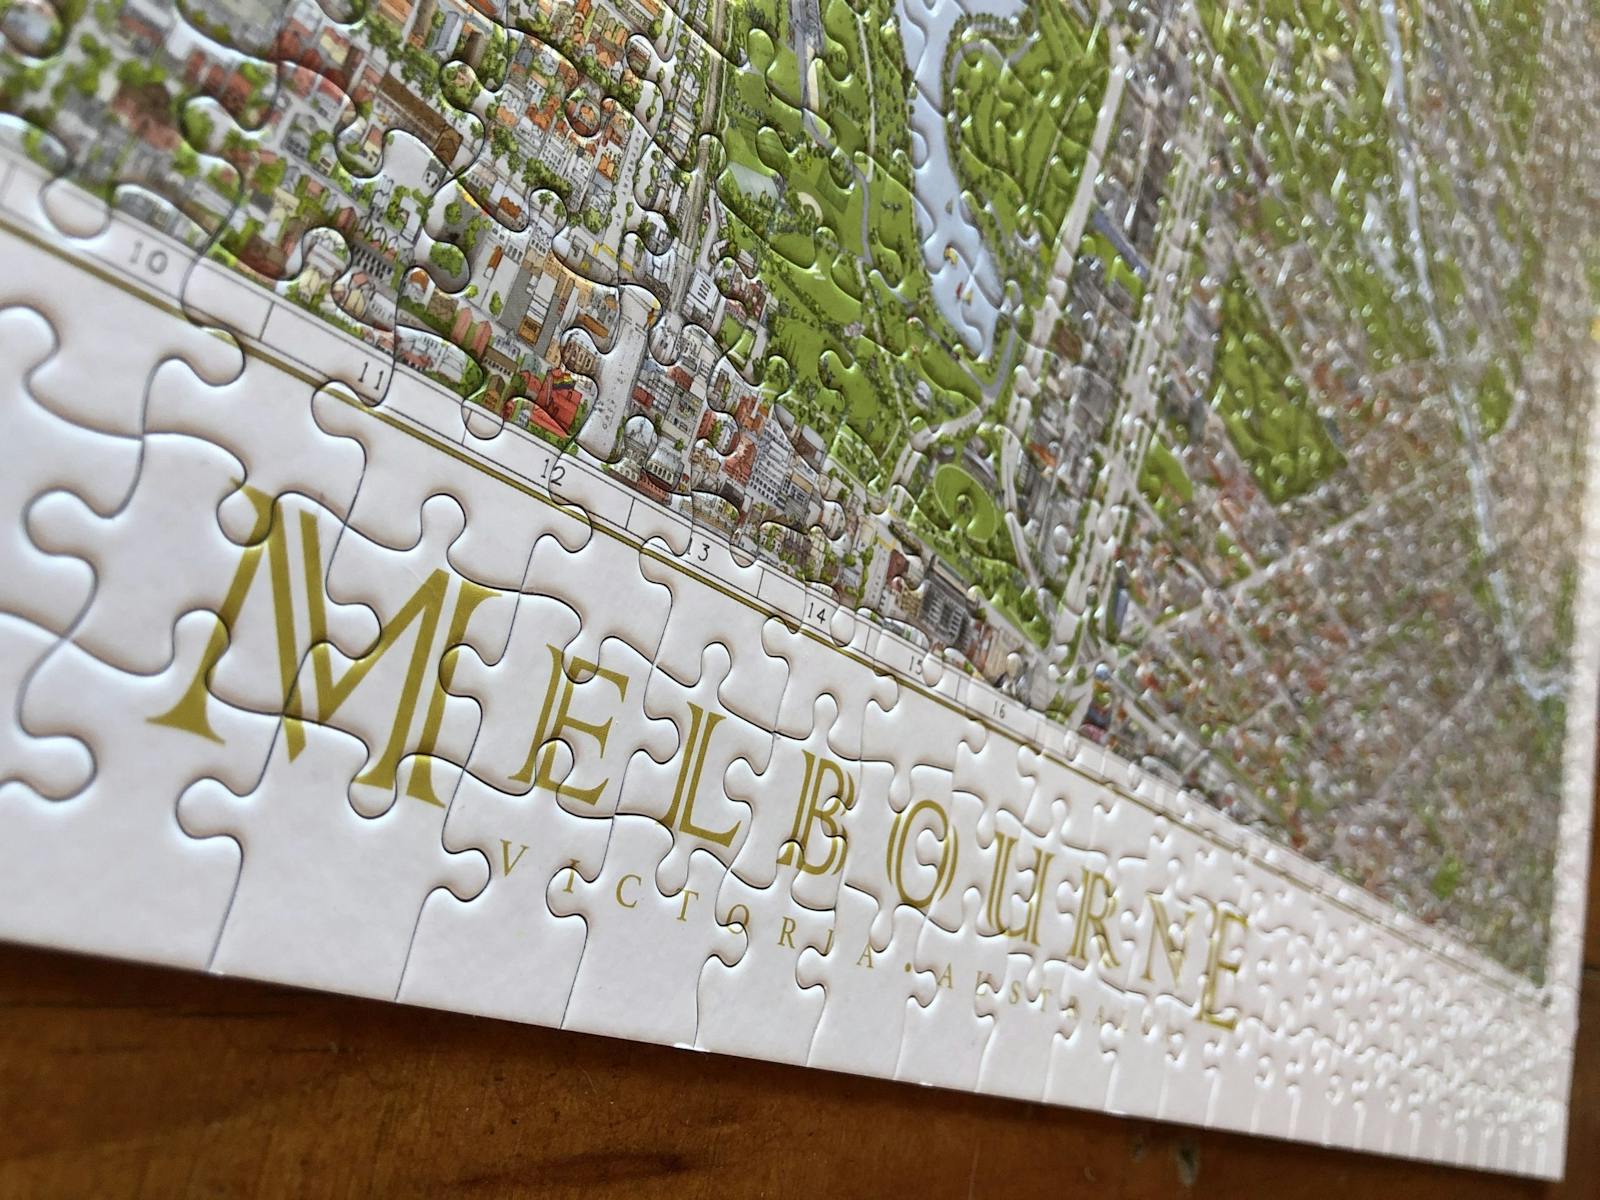 Award winning Melbourne Map, now available as a jigsaw puzzle